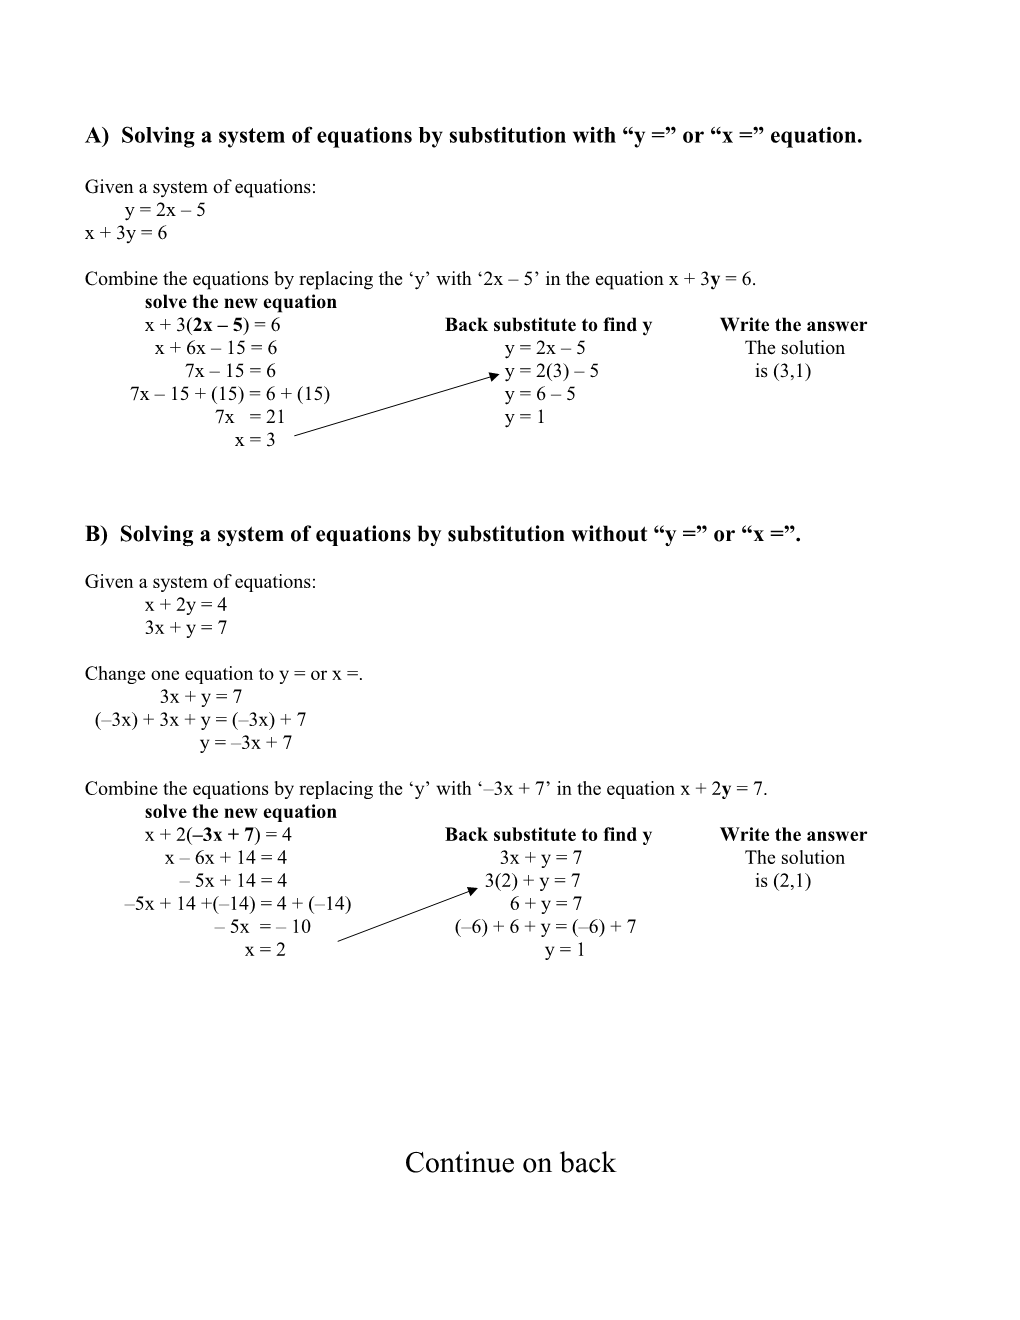 A) Solving a System of Equations by Substitution with an Y = Or X = Equation